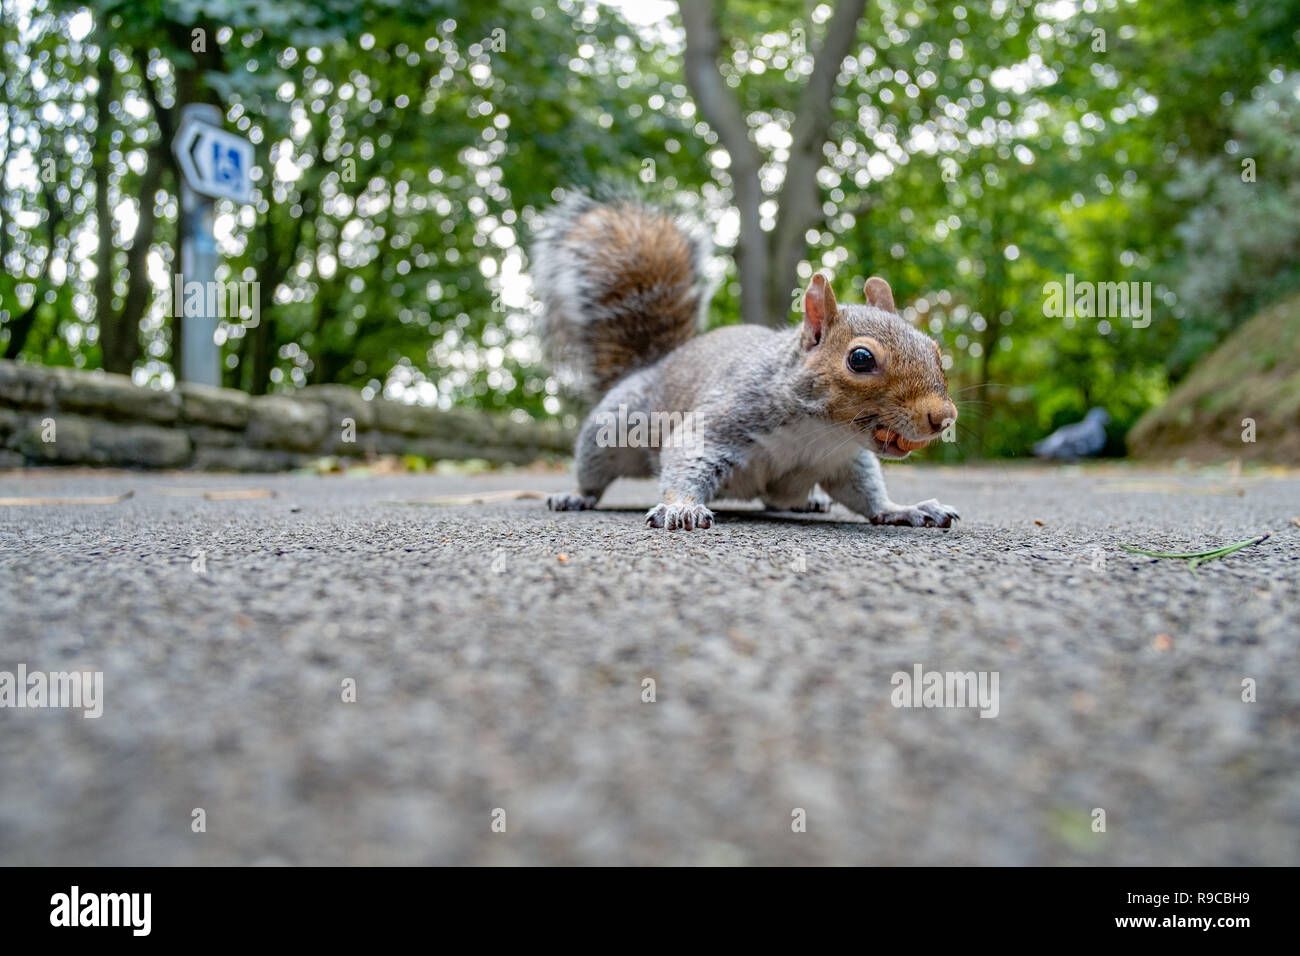 Low down angle shot of grey squirrel on path Stock Photo